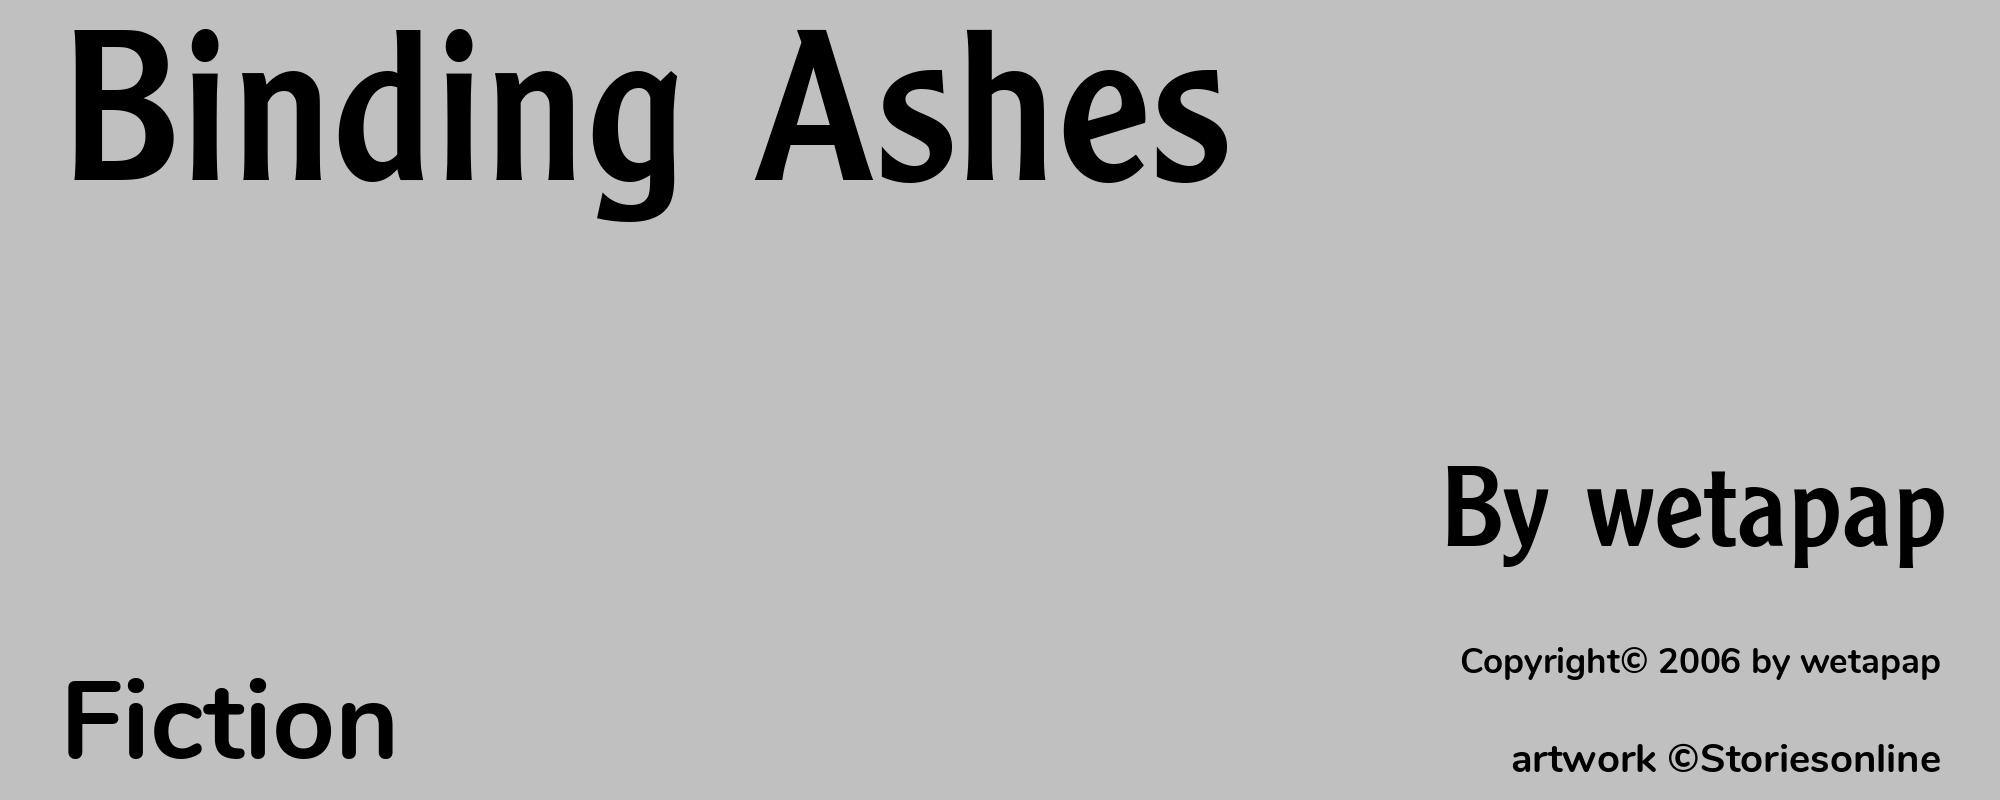 Binding Ashes - Cover